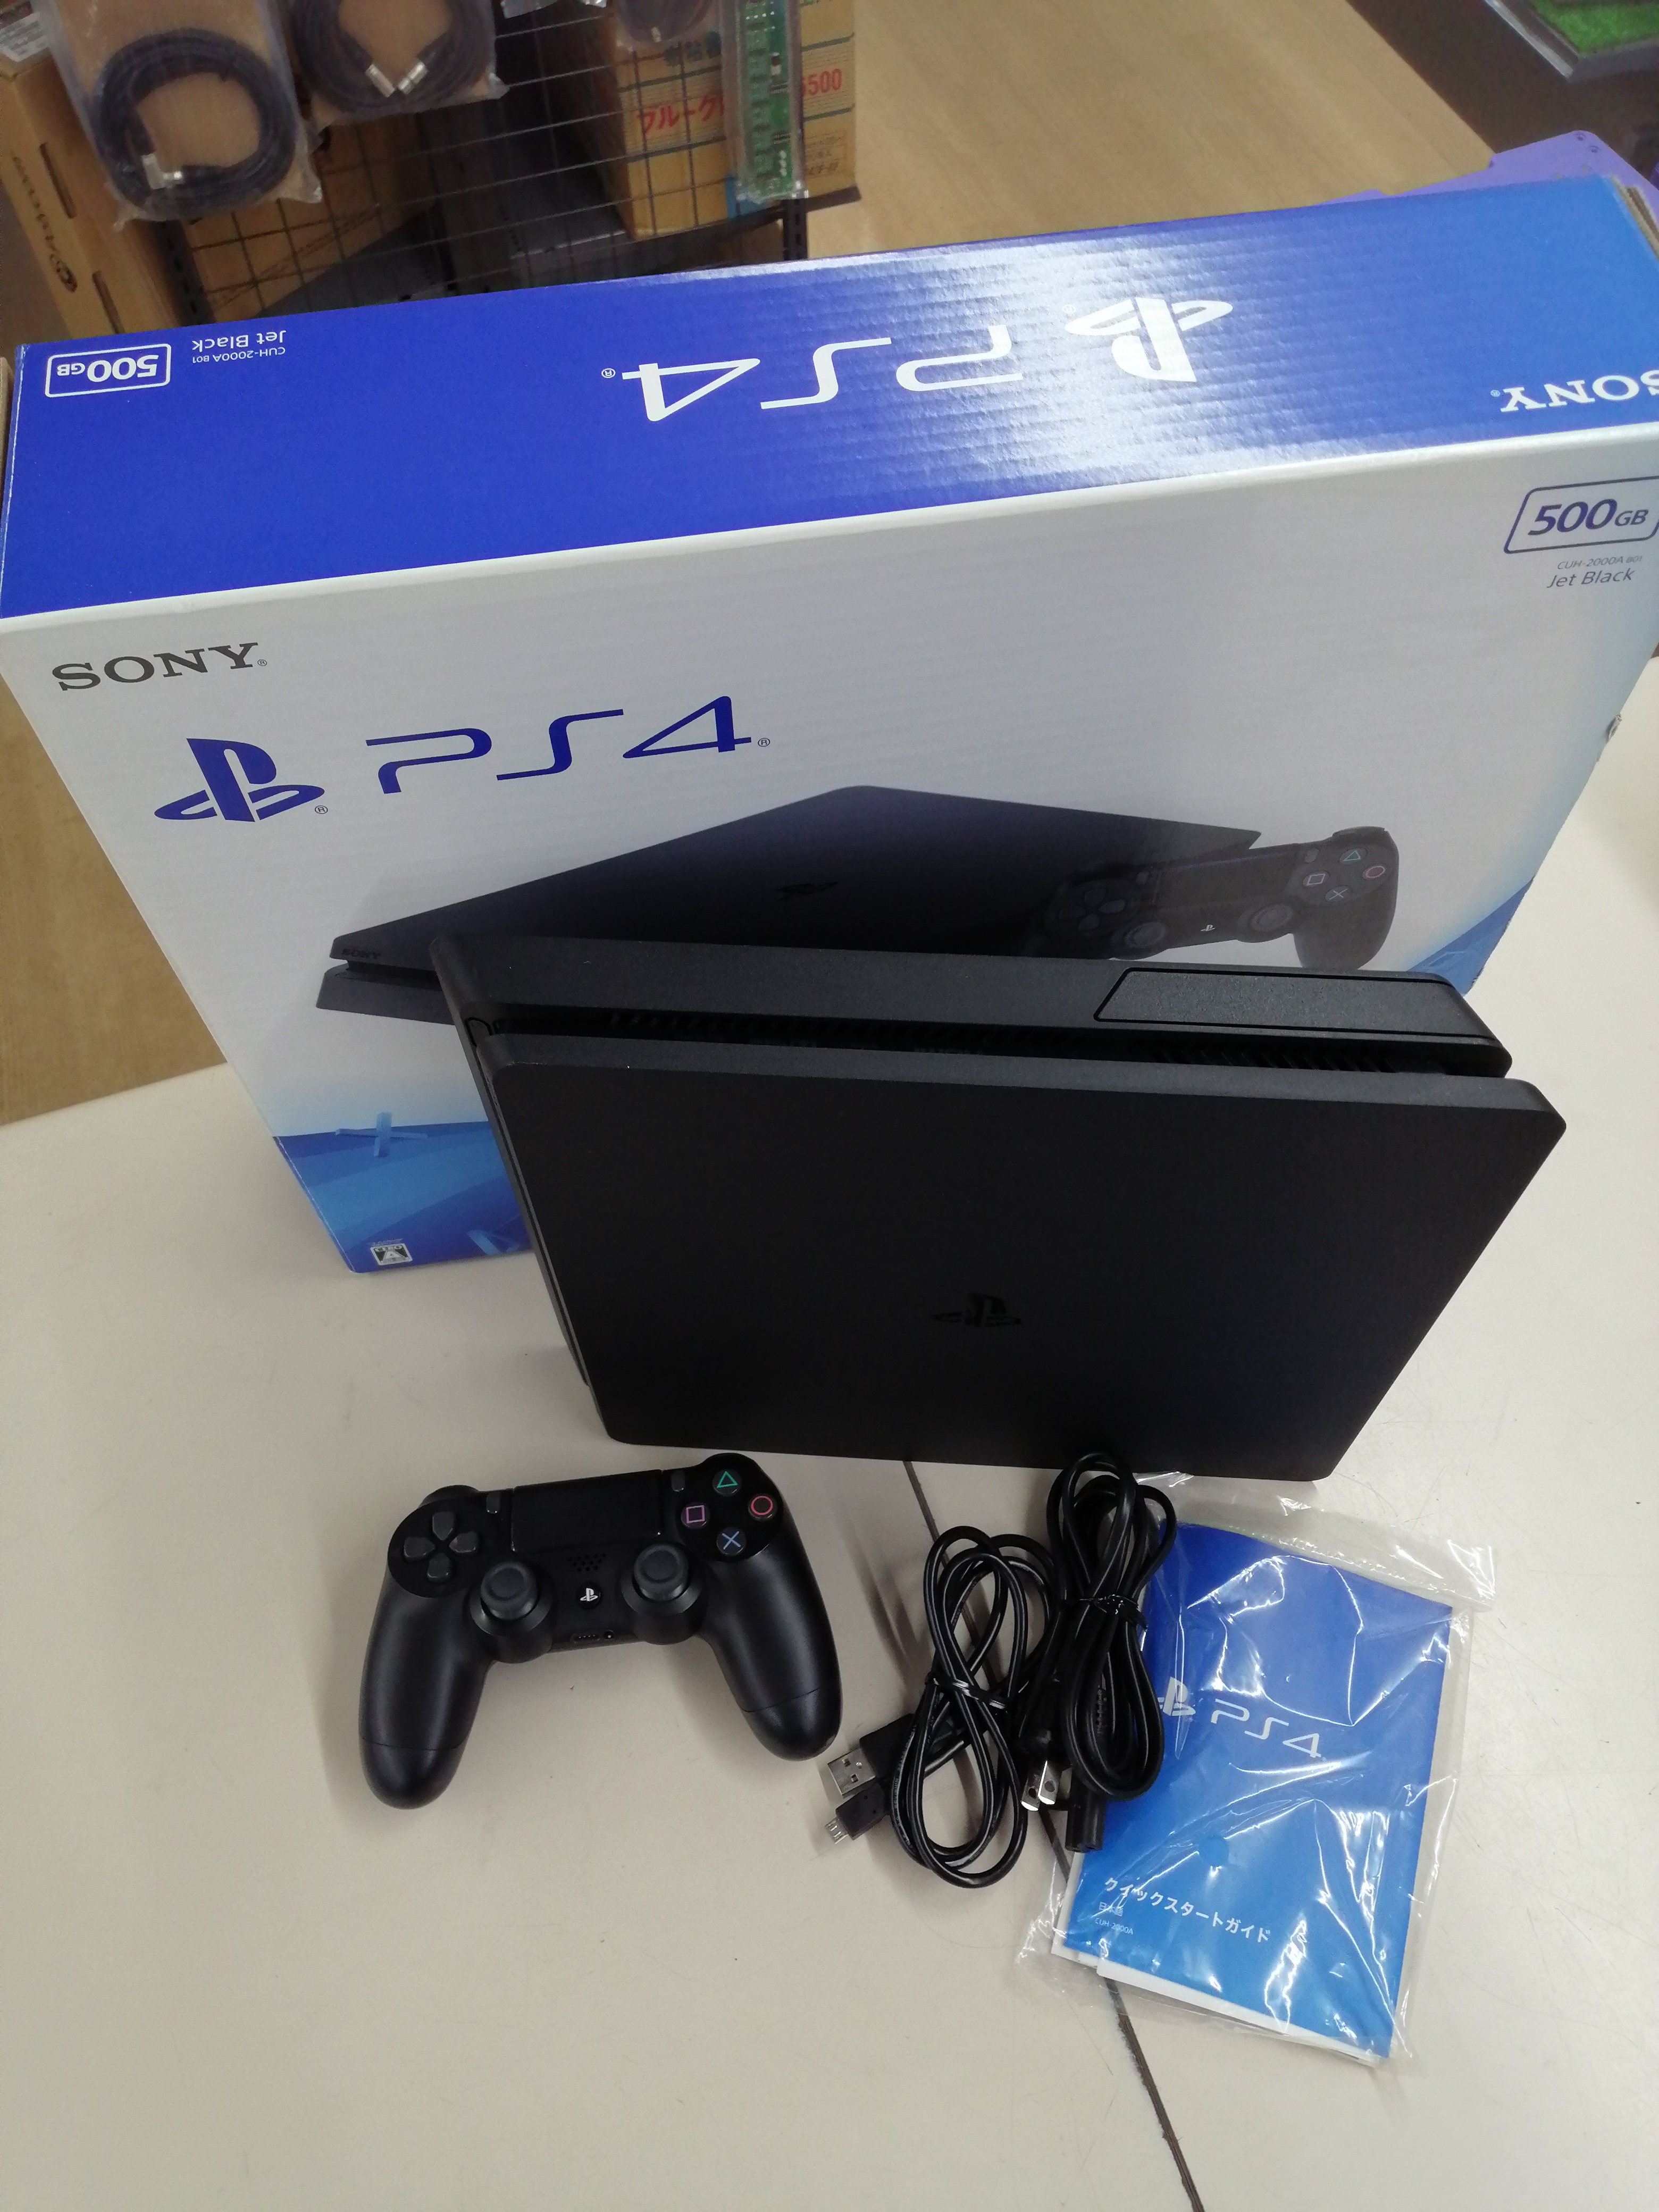 Buy PS4 SONY CUH-2000A game console body from Japan - Buy